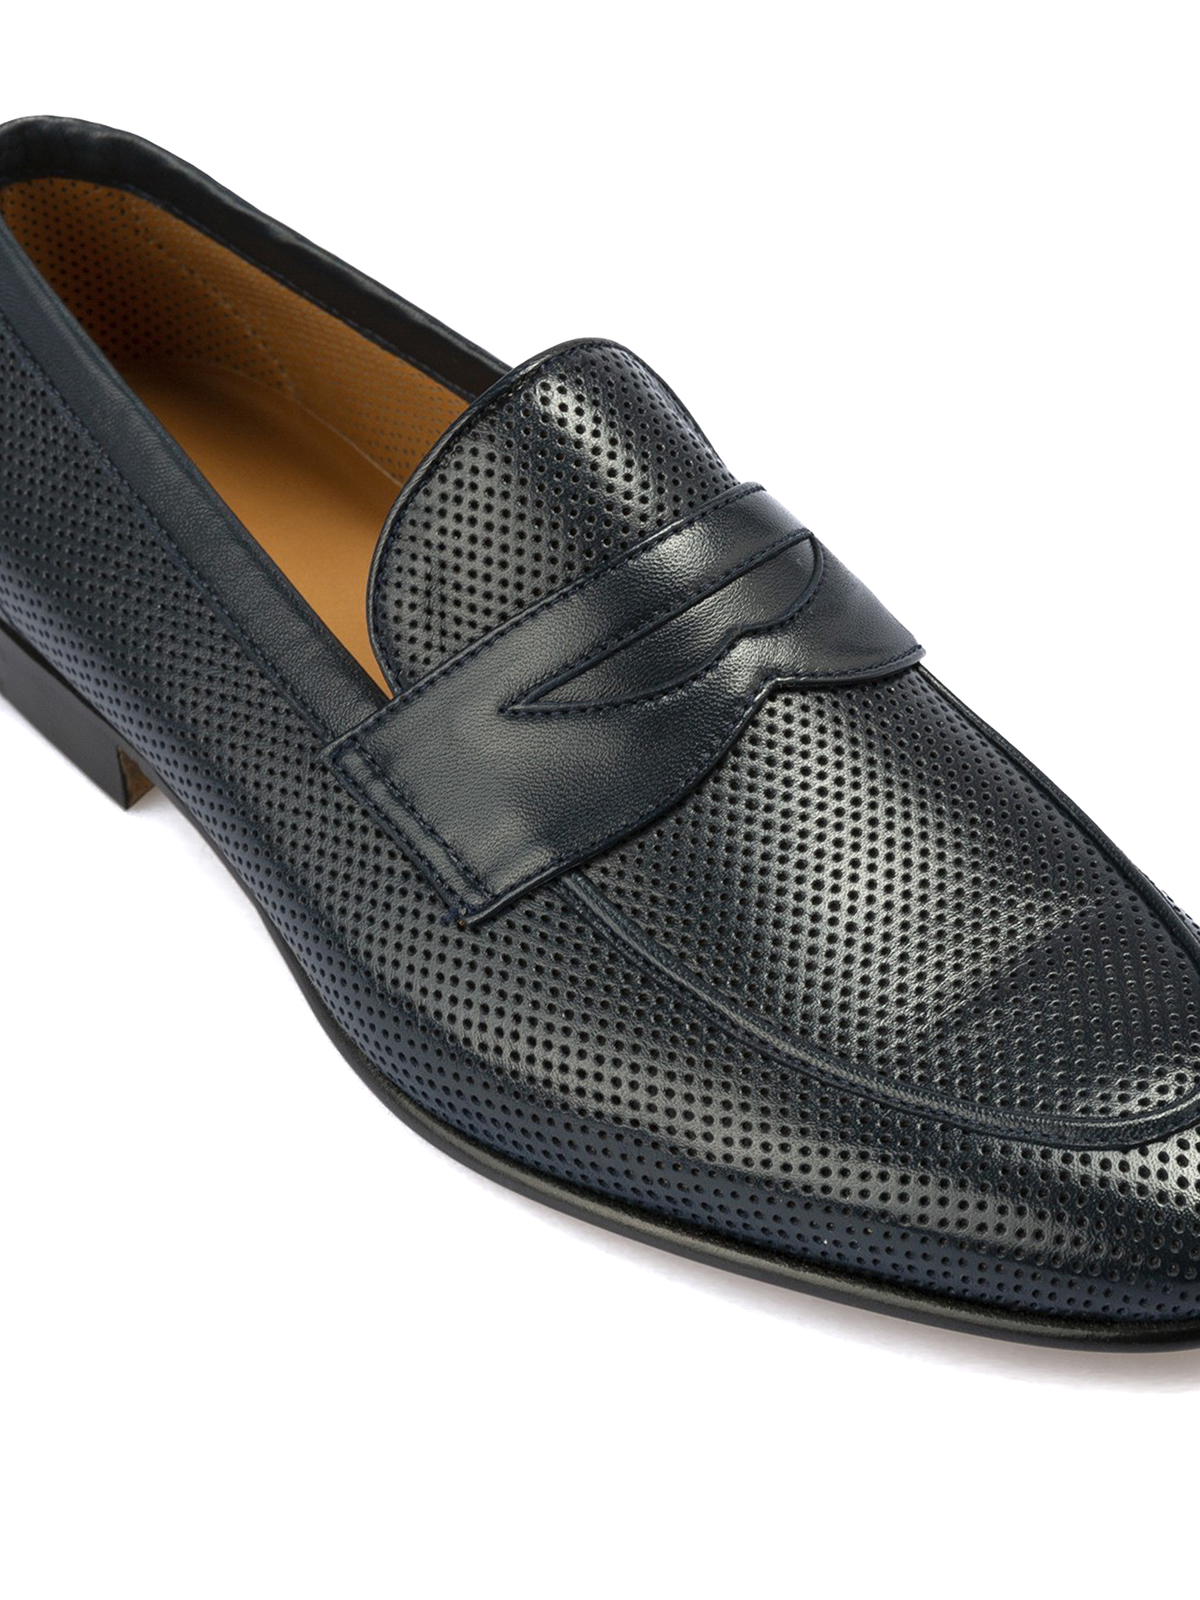 Perforated deer leather loafers 